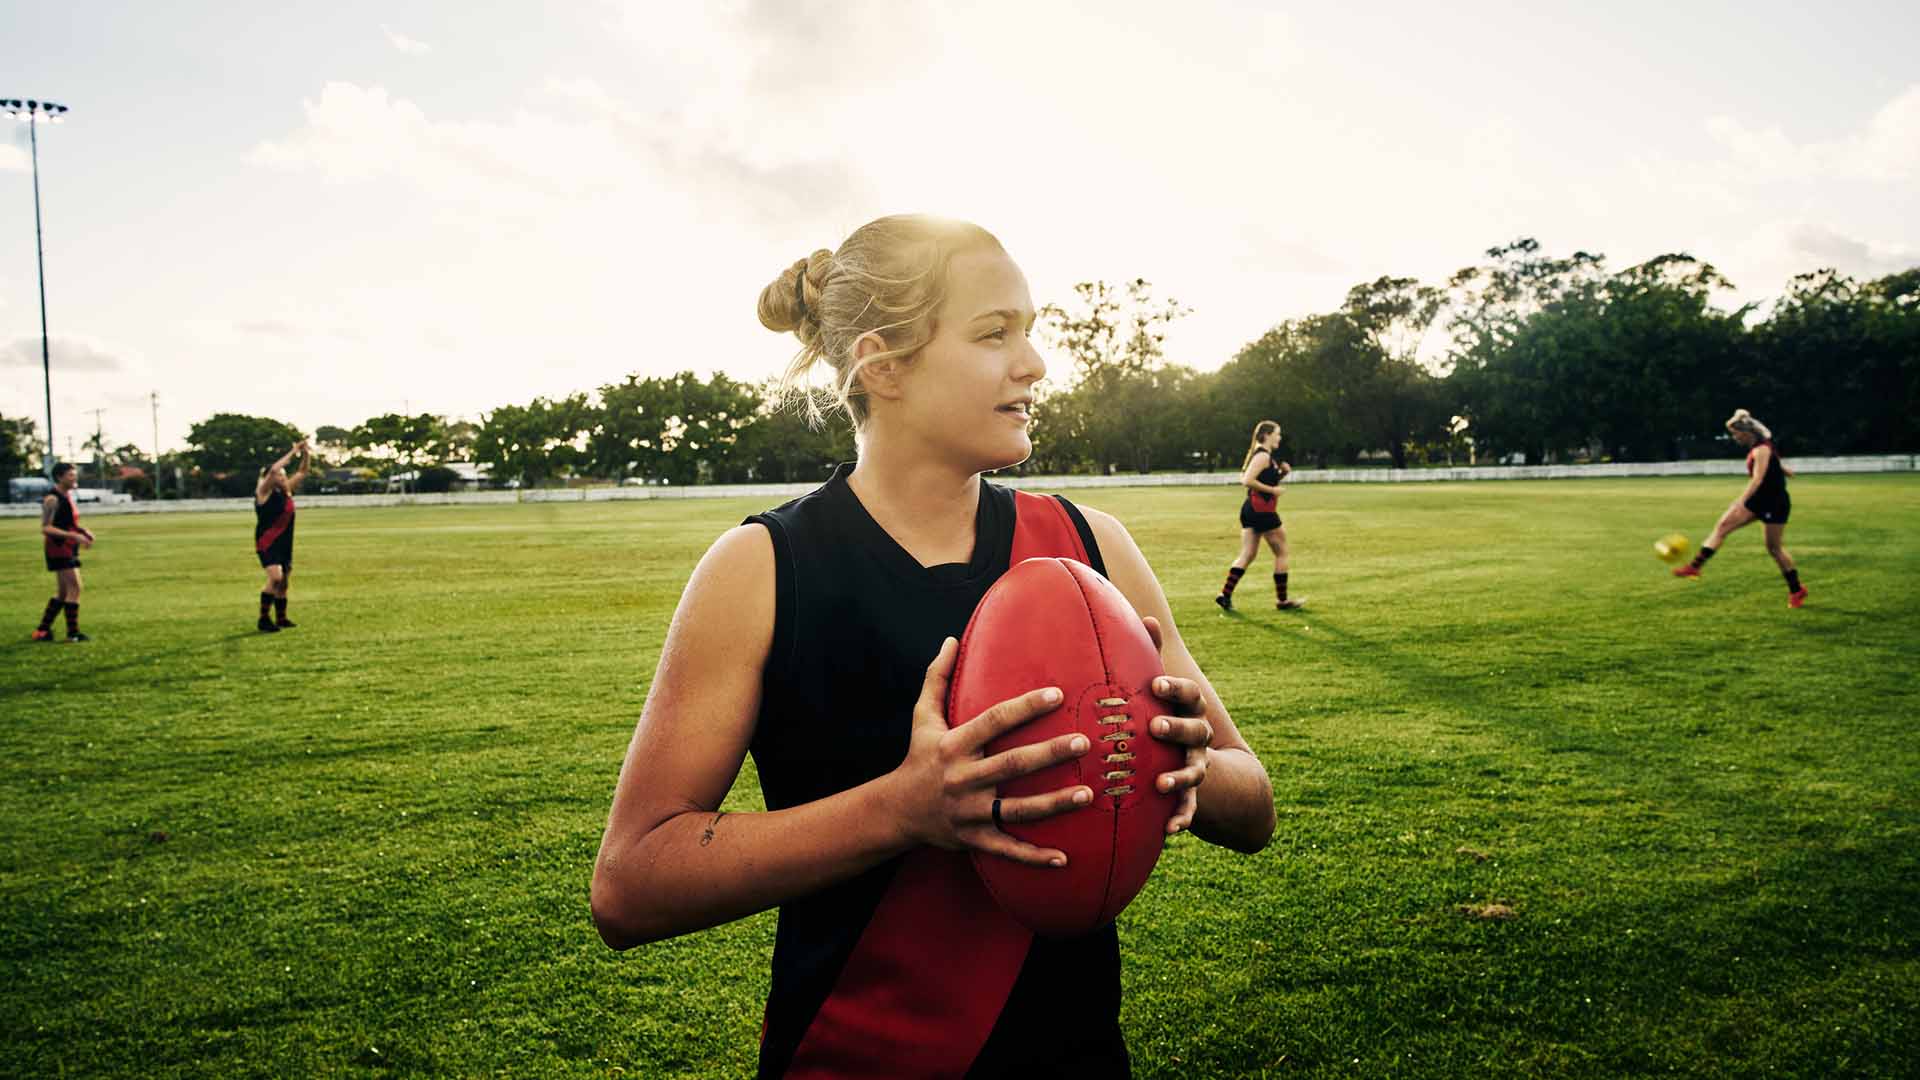 Shot of a young woman holding a football on a field with her team in the background